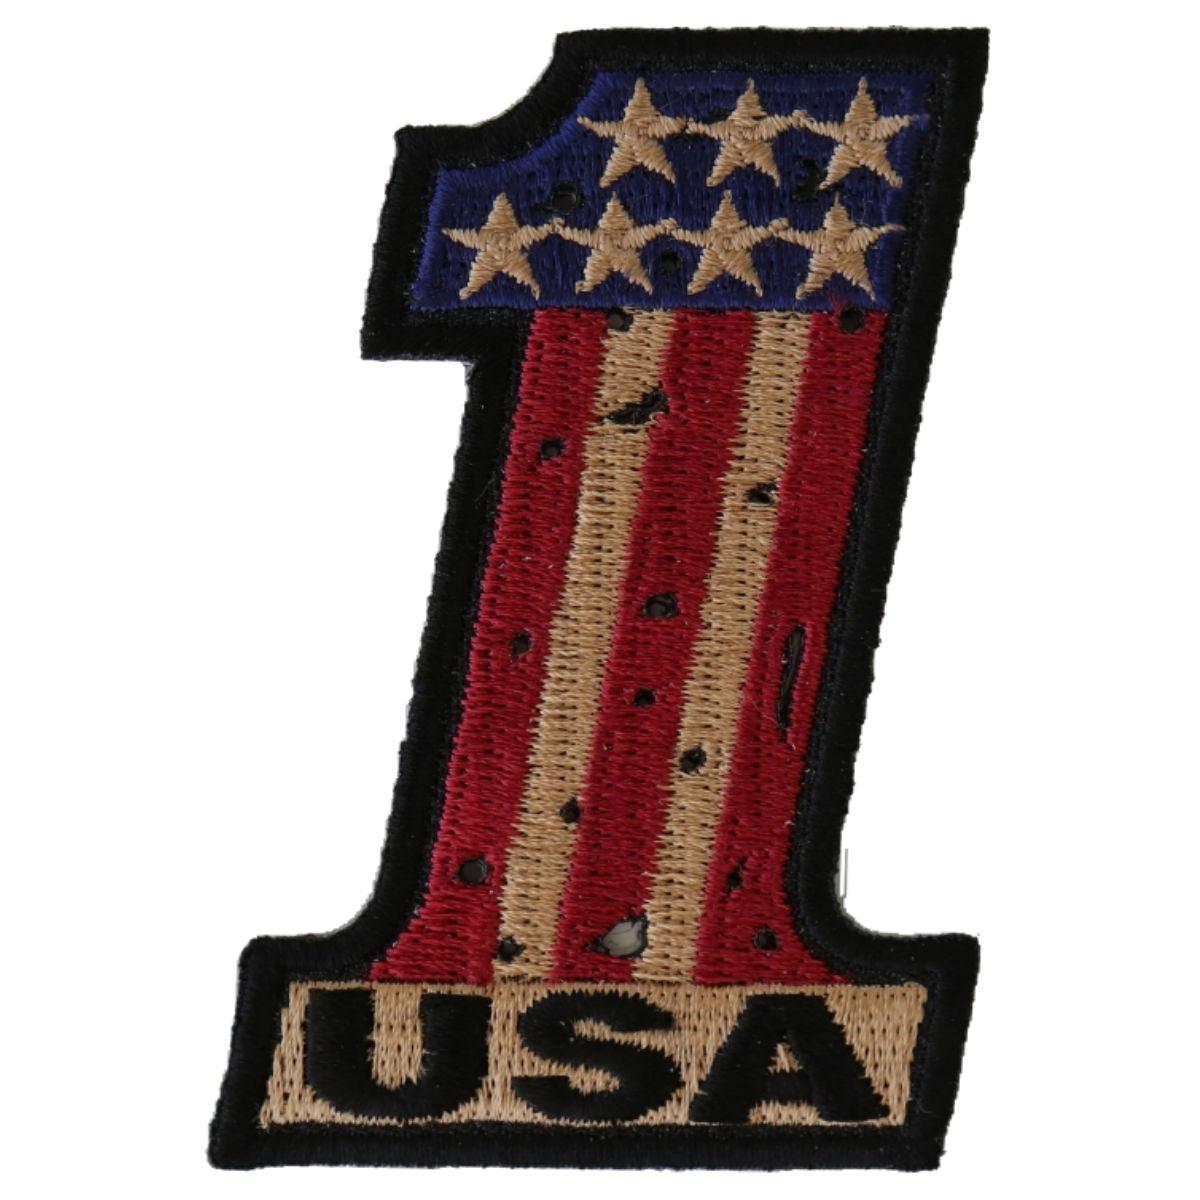 Daniel Smart Number 1 USA Vintage Flag and Stars Patch, 2 x 3 inches - American Legend Rider